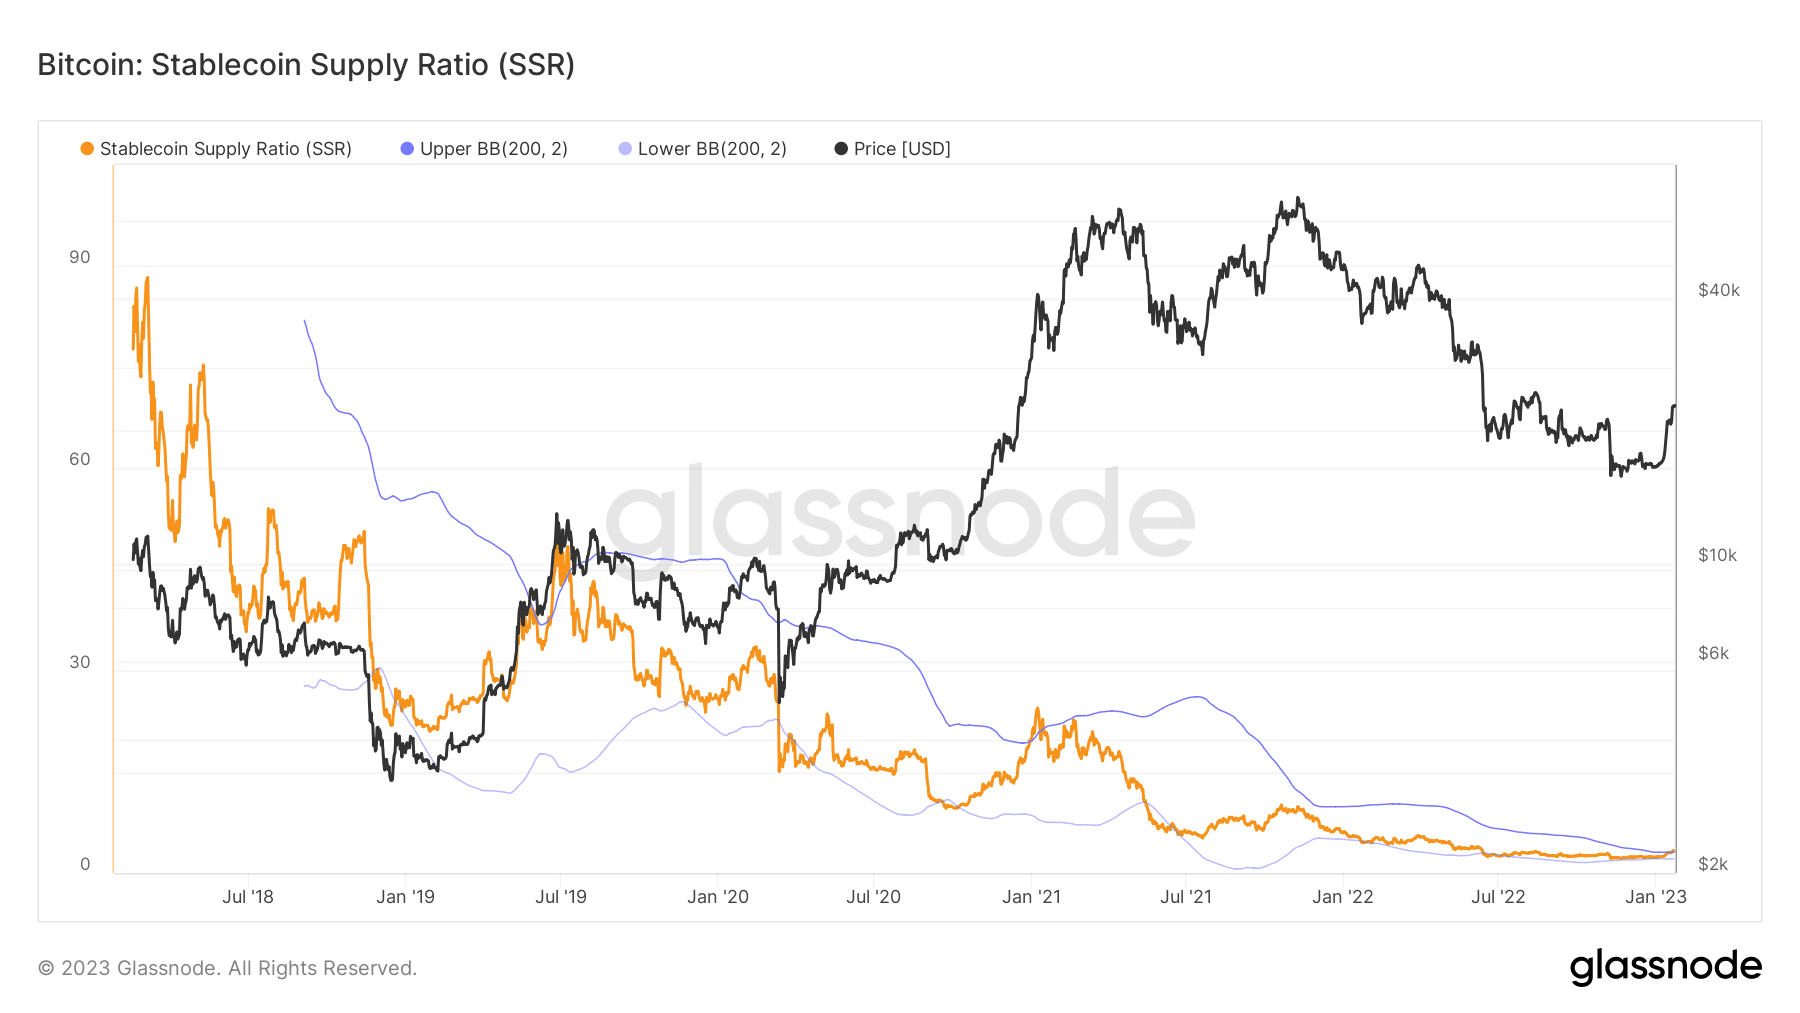 Stablecoin Supply Ratio: (Source: Glassnode)